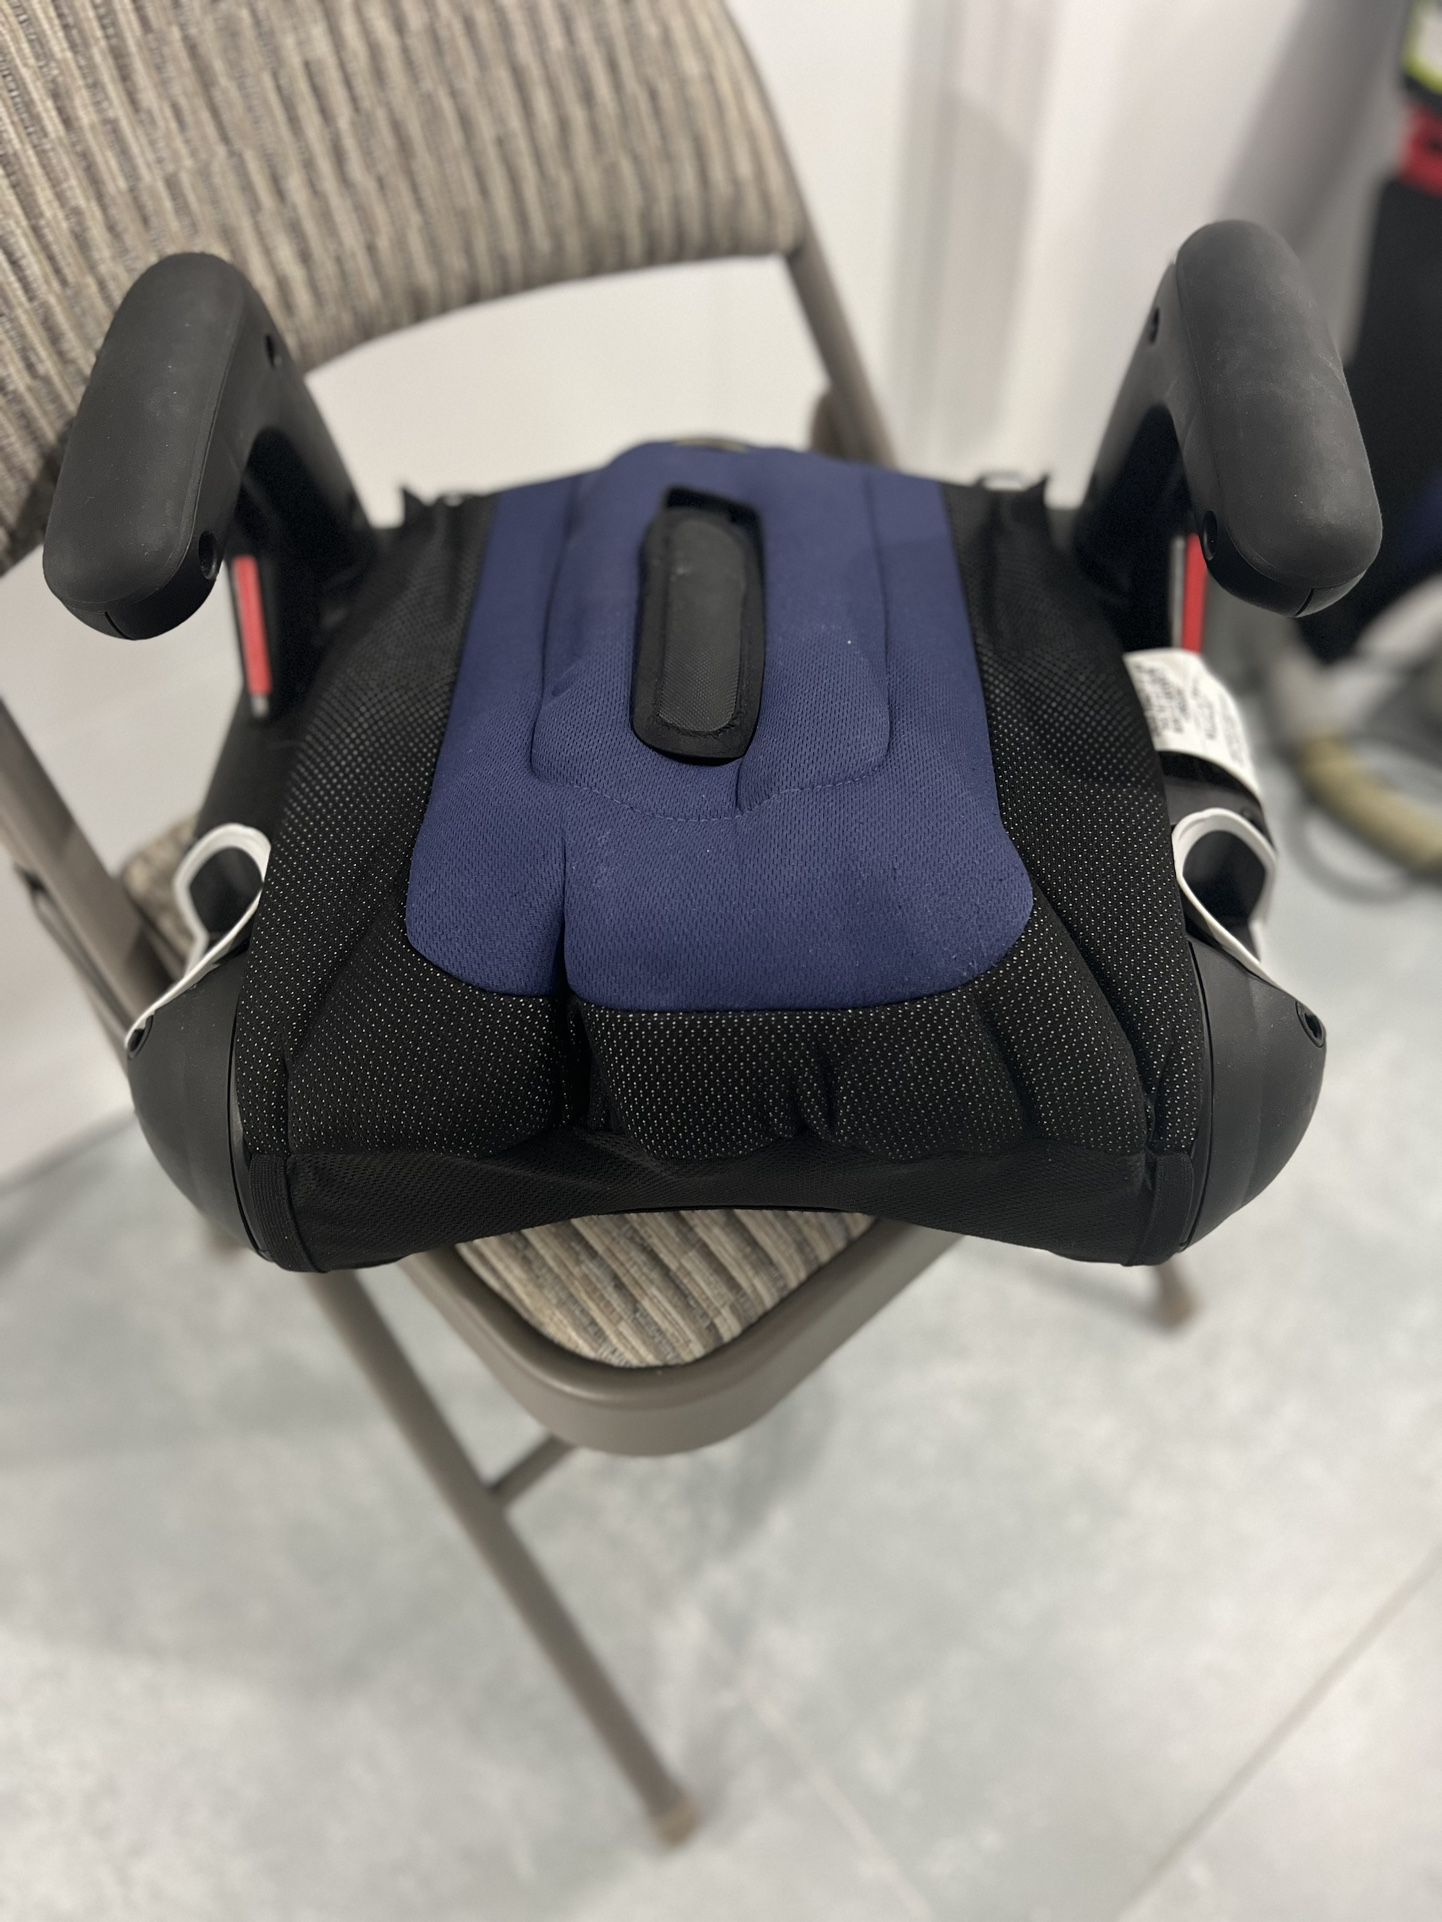 GRACO Booster Seat With Back